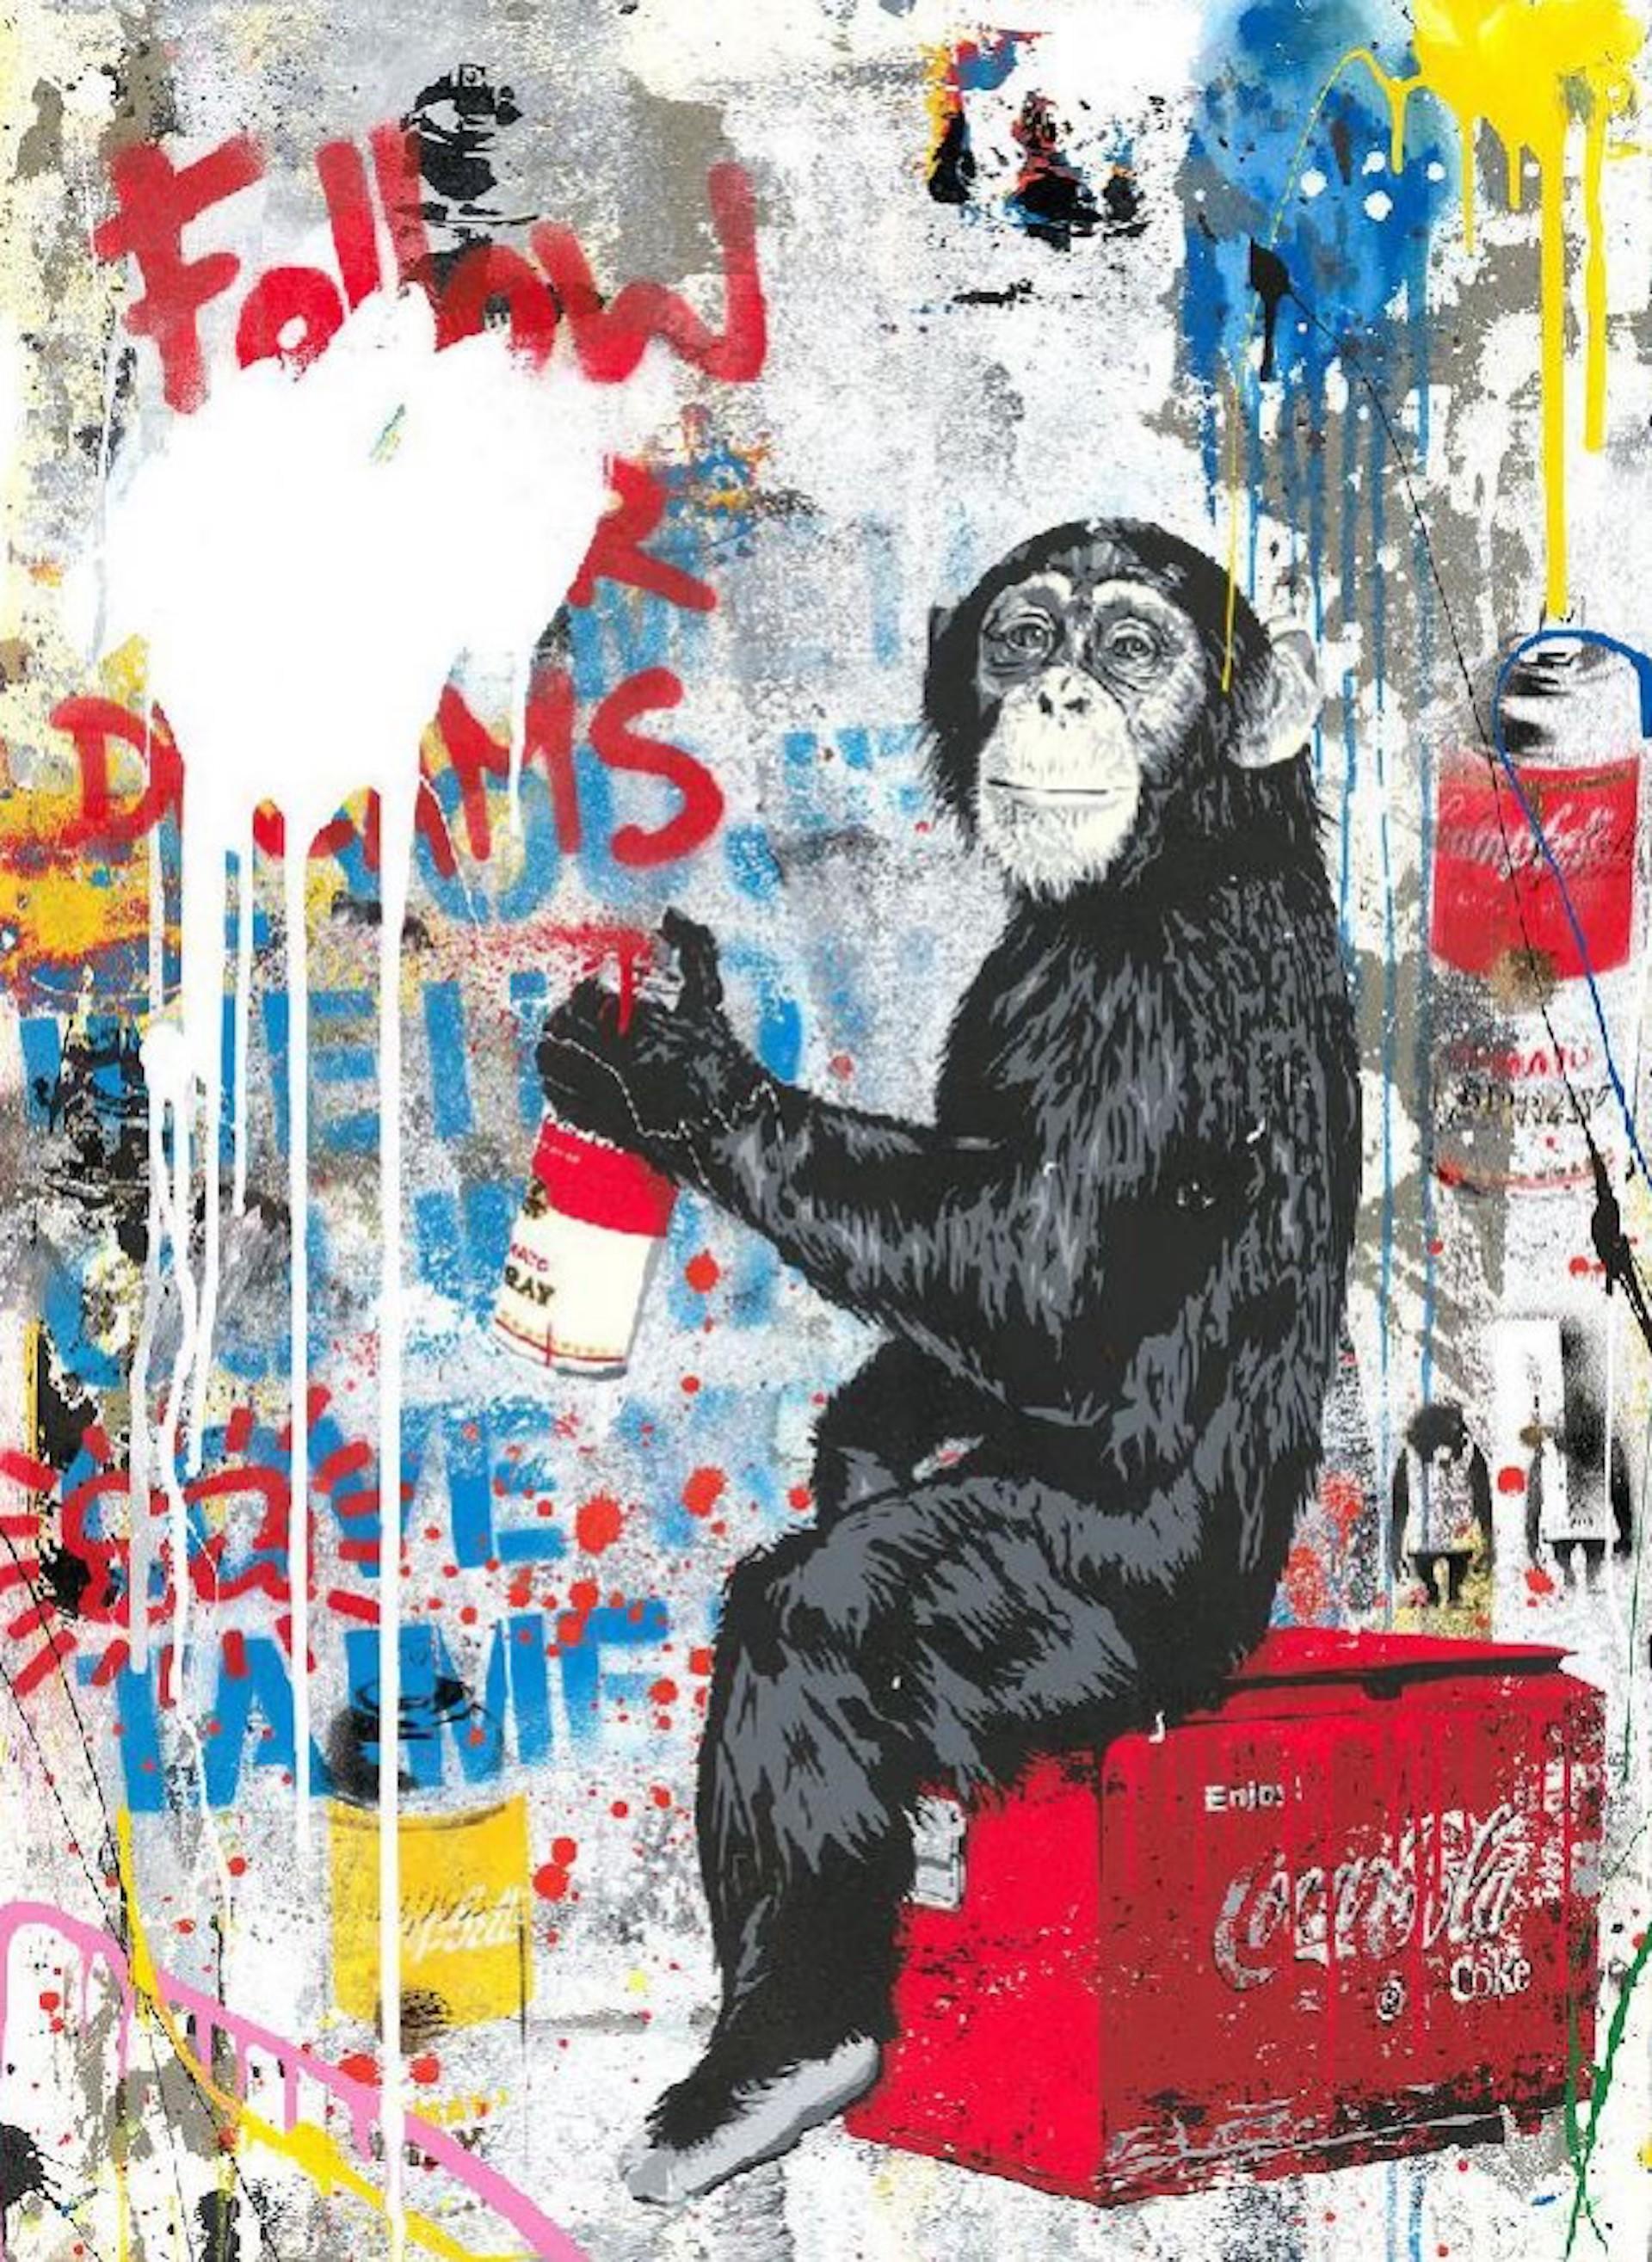 Every Day Life - Follow your Dreams on cement - Mixed Media Art by Mr. Brainwash